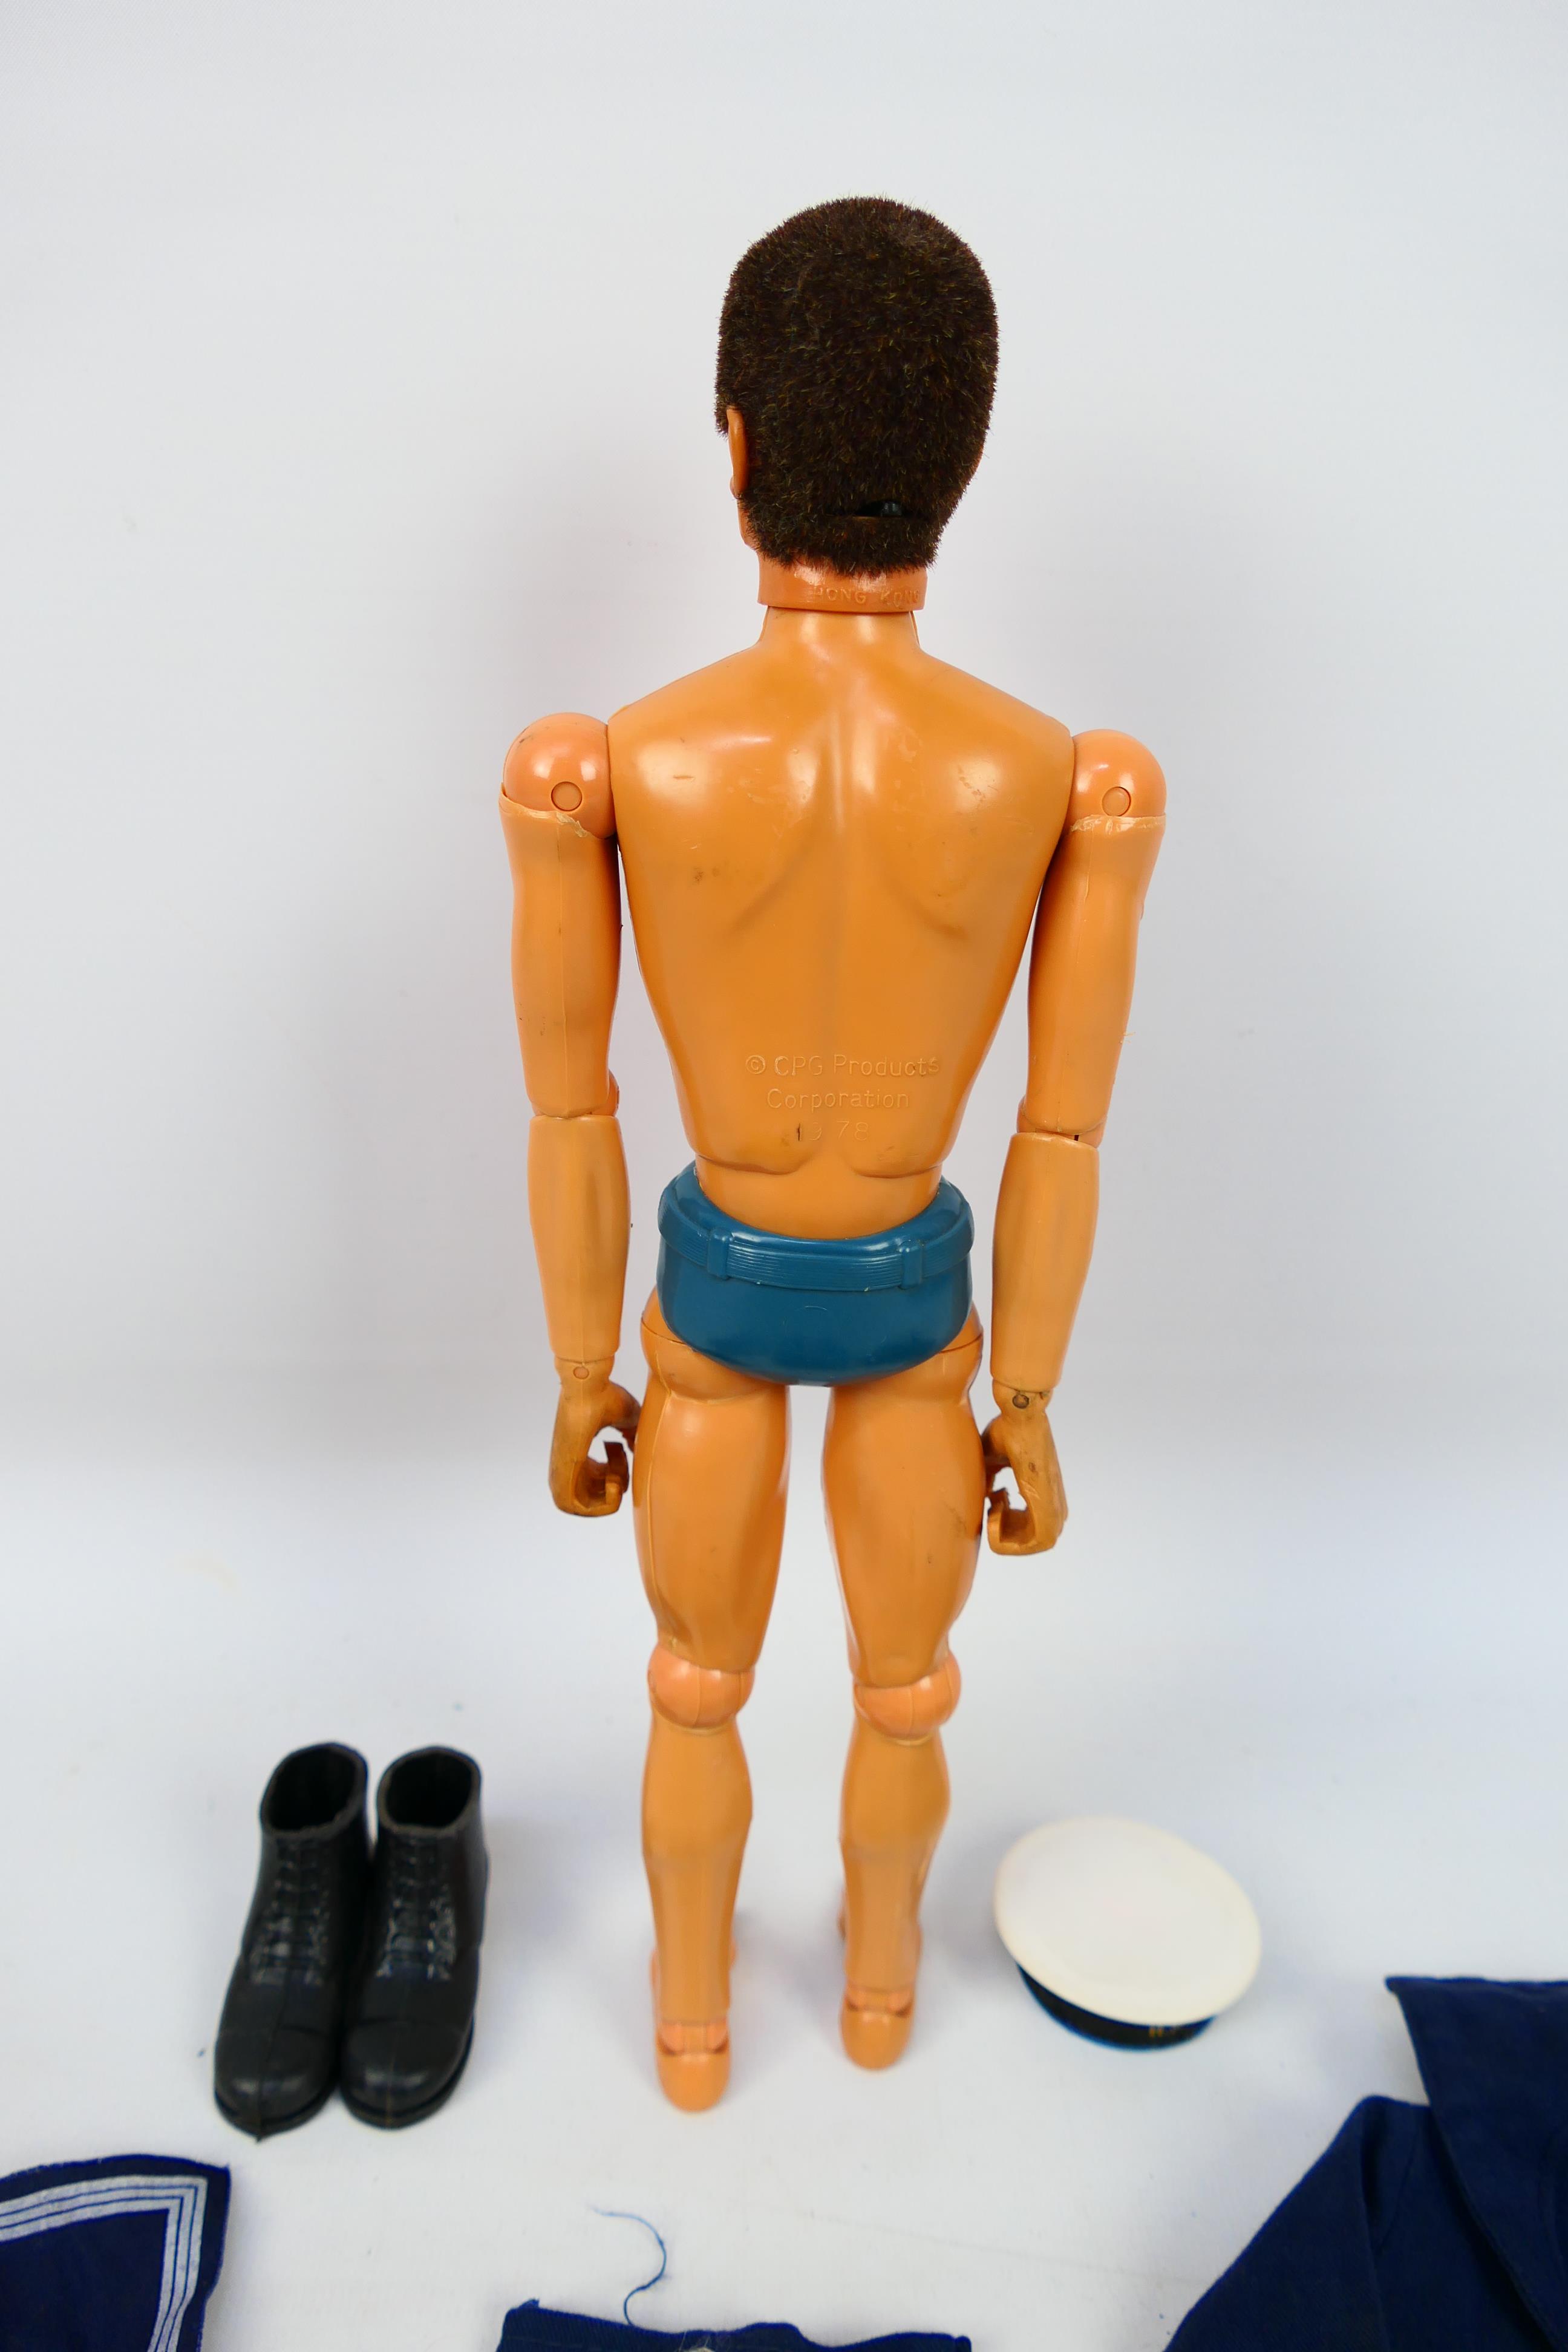 Palitoy - Action Man - An unboxed 1978 Action Man action figure with Flock hair and eagle eyes and - Image 7 of 12